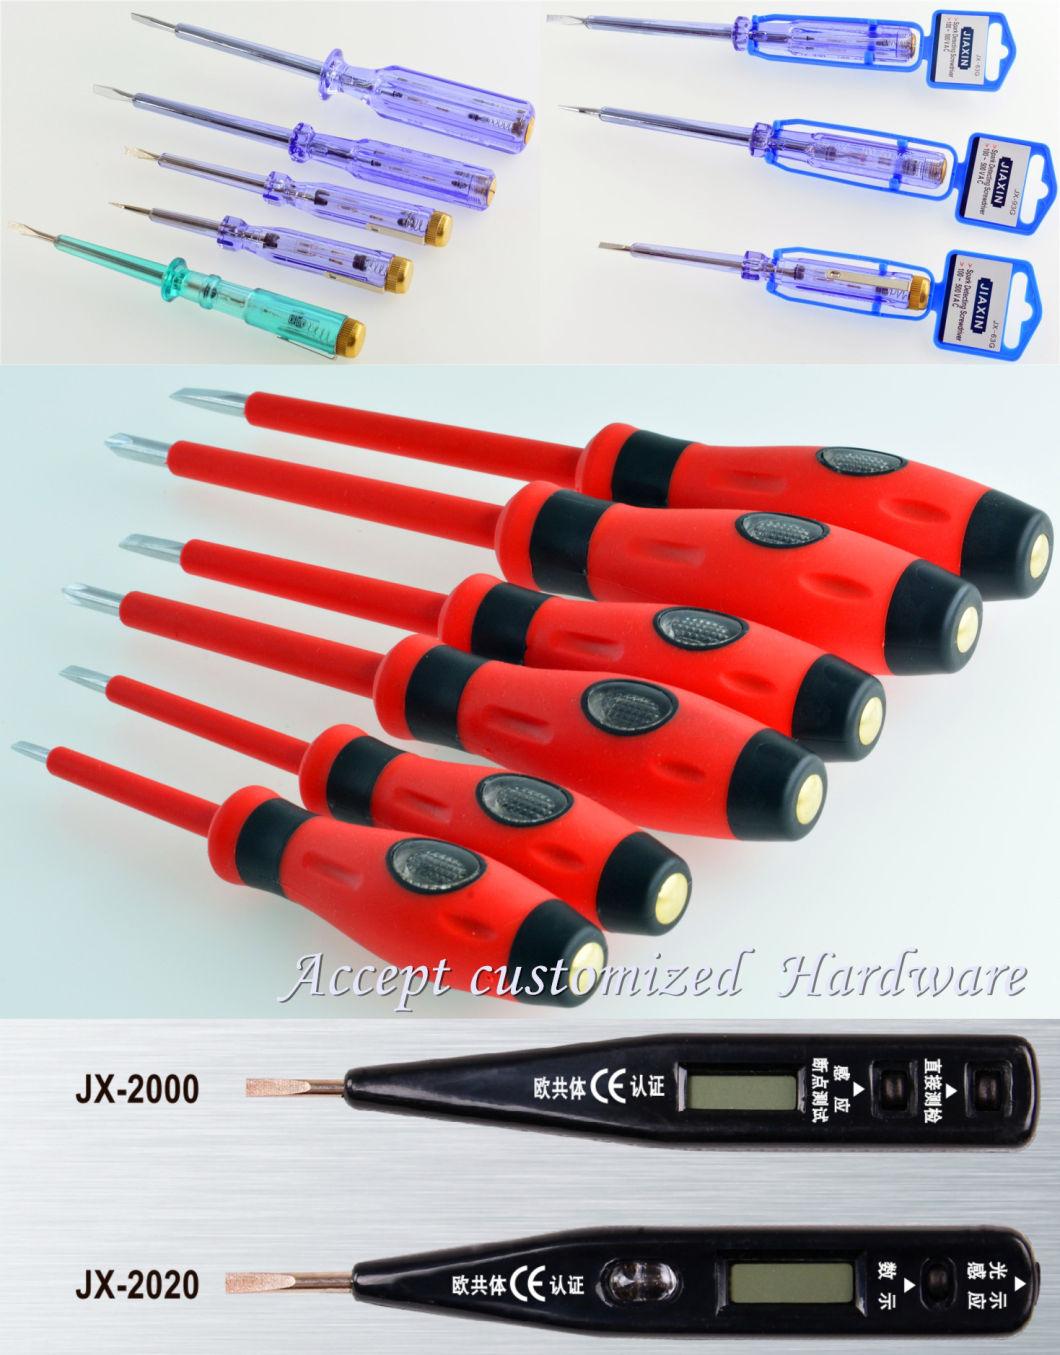 185mm 100-500V Manufactured Voltage Electrical Tester Pen with Ce Neon